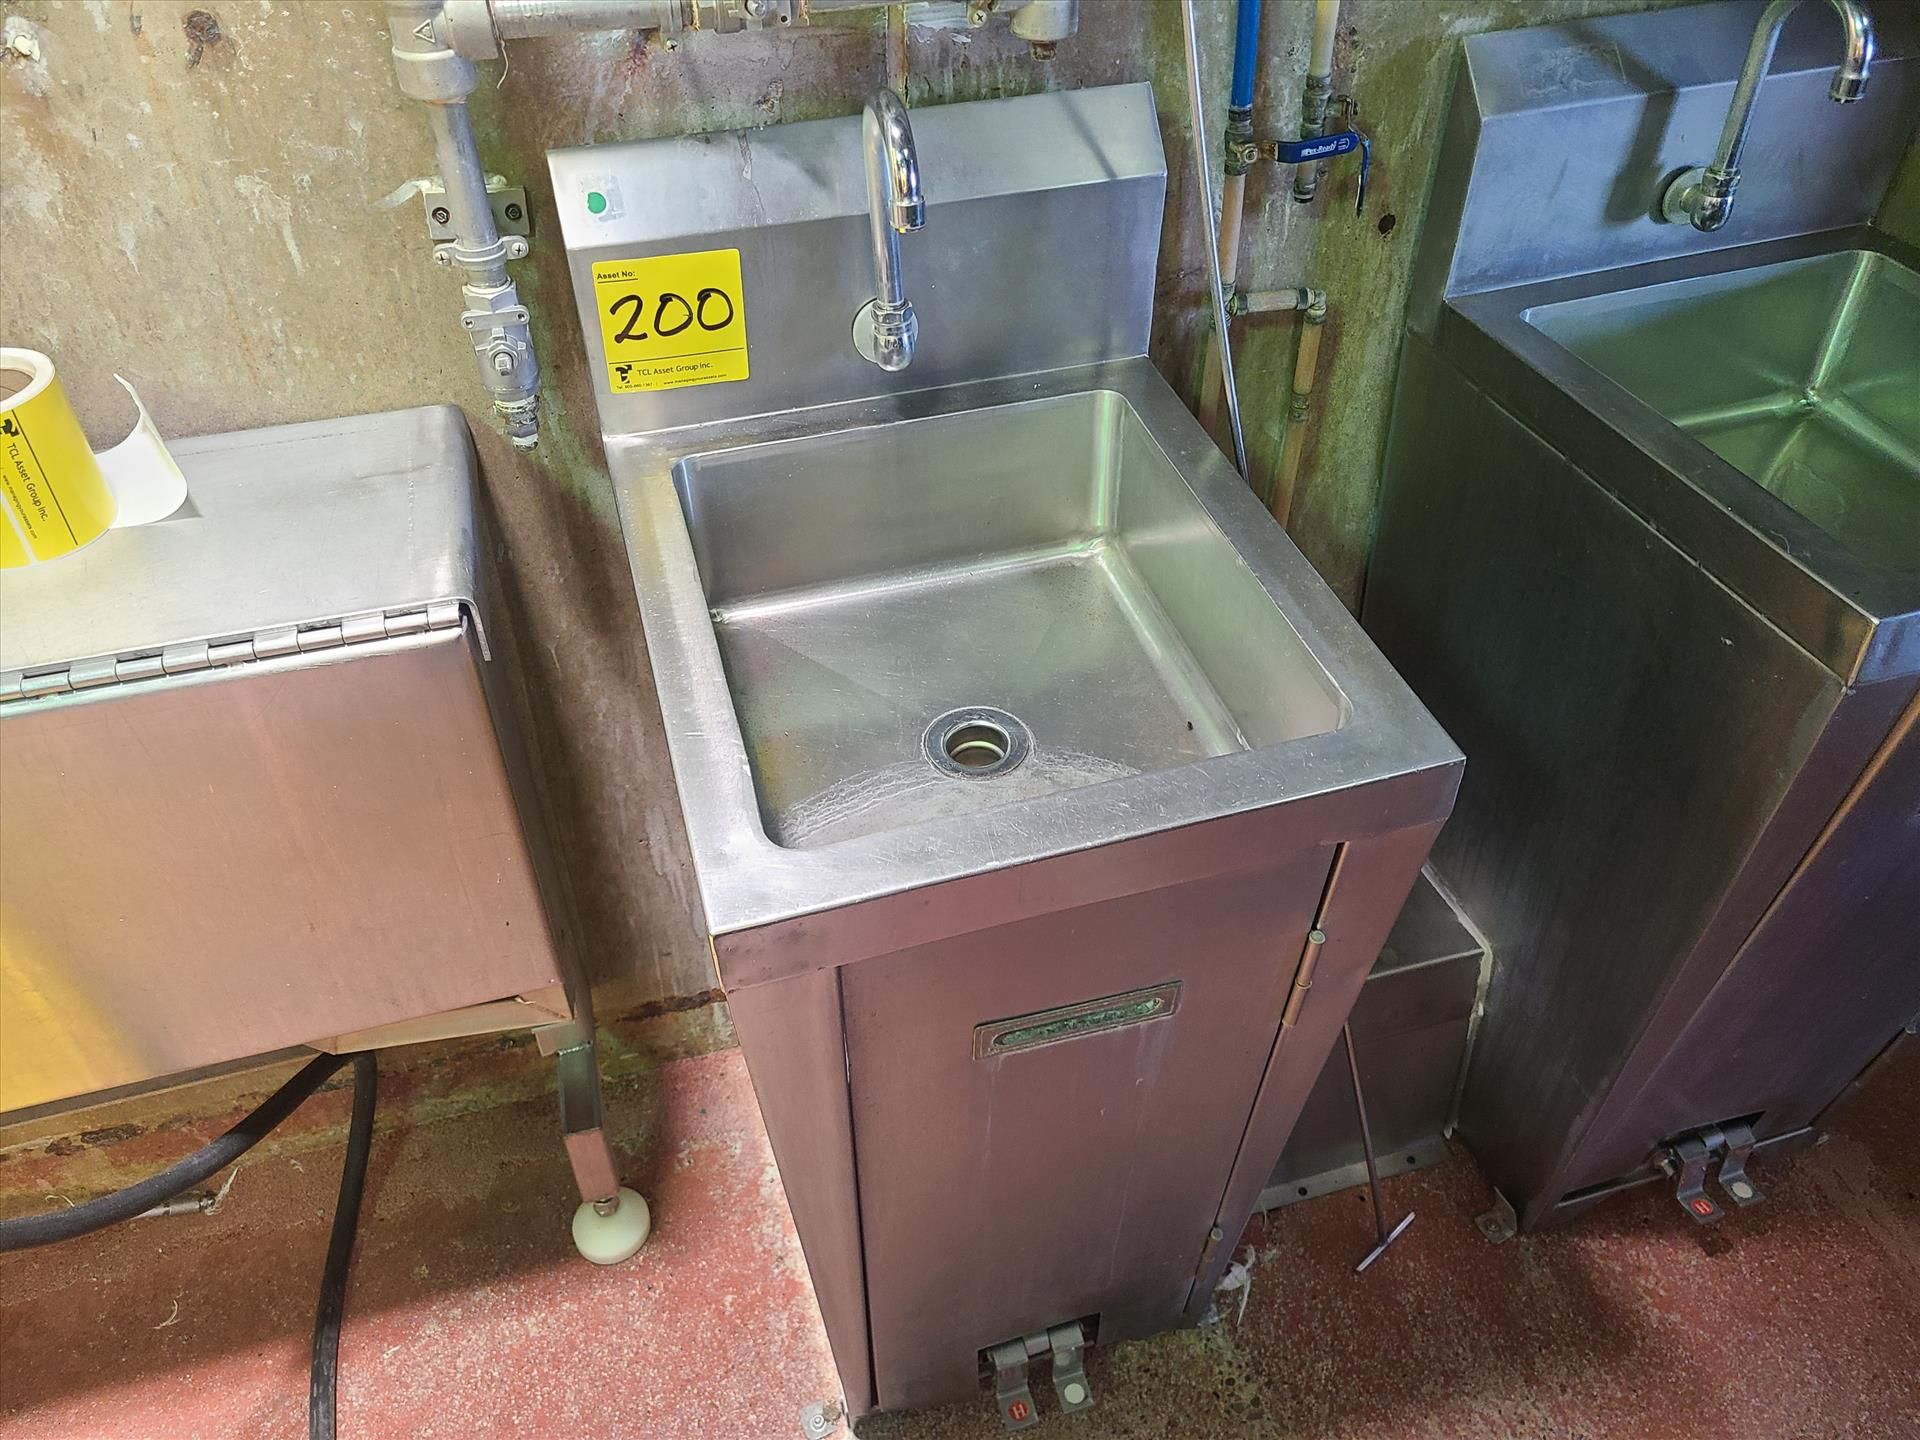 Nella hand wash sink, stainless steel, foot operated [Production]